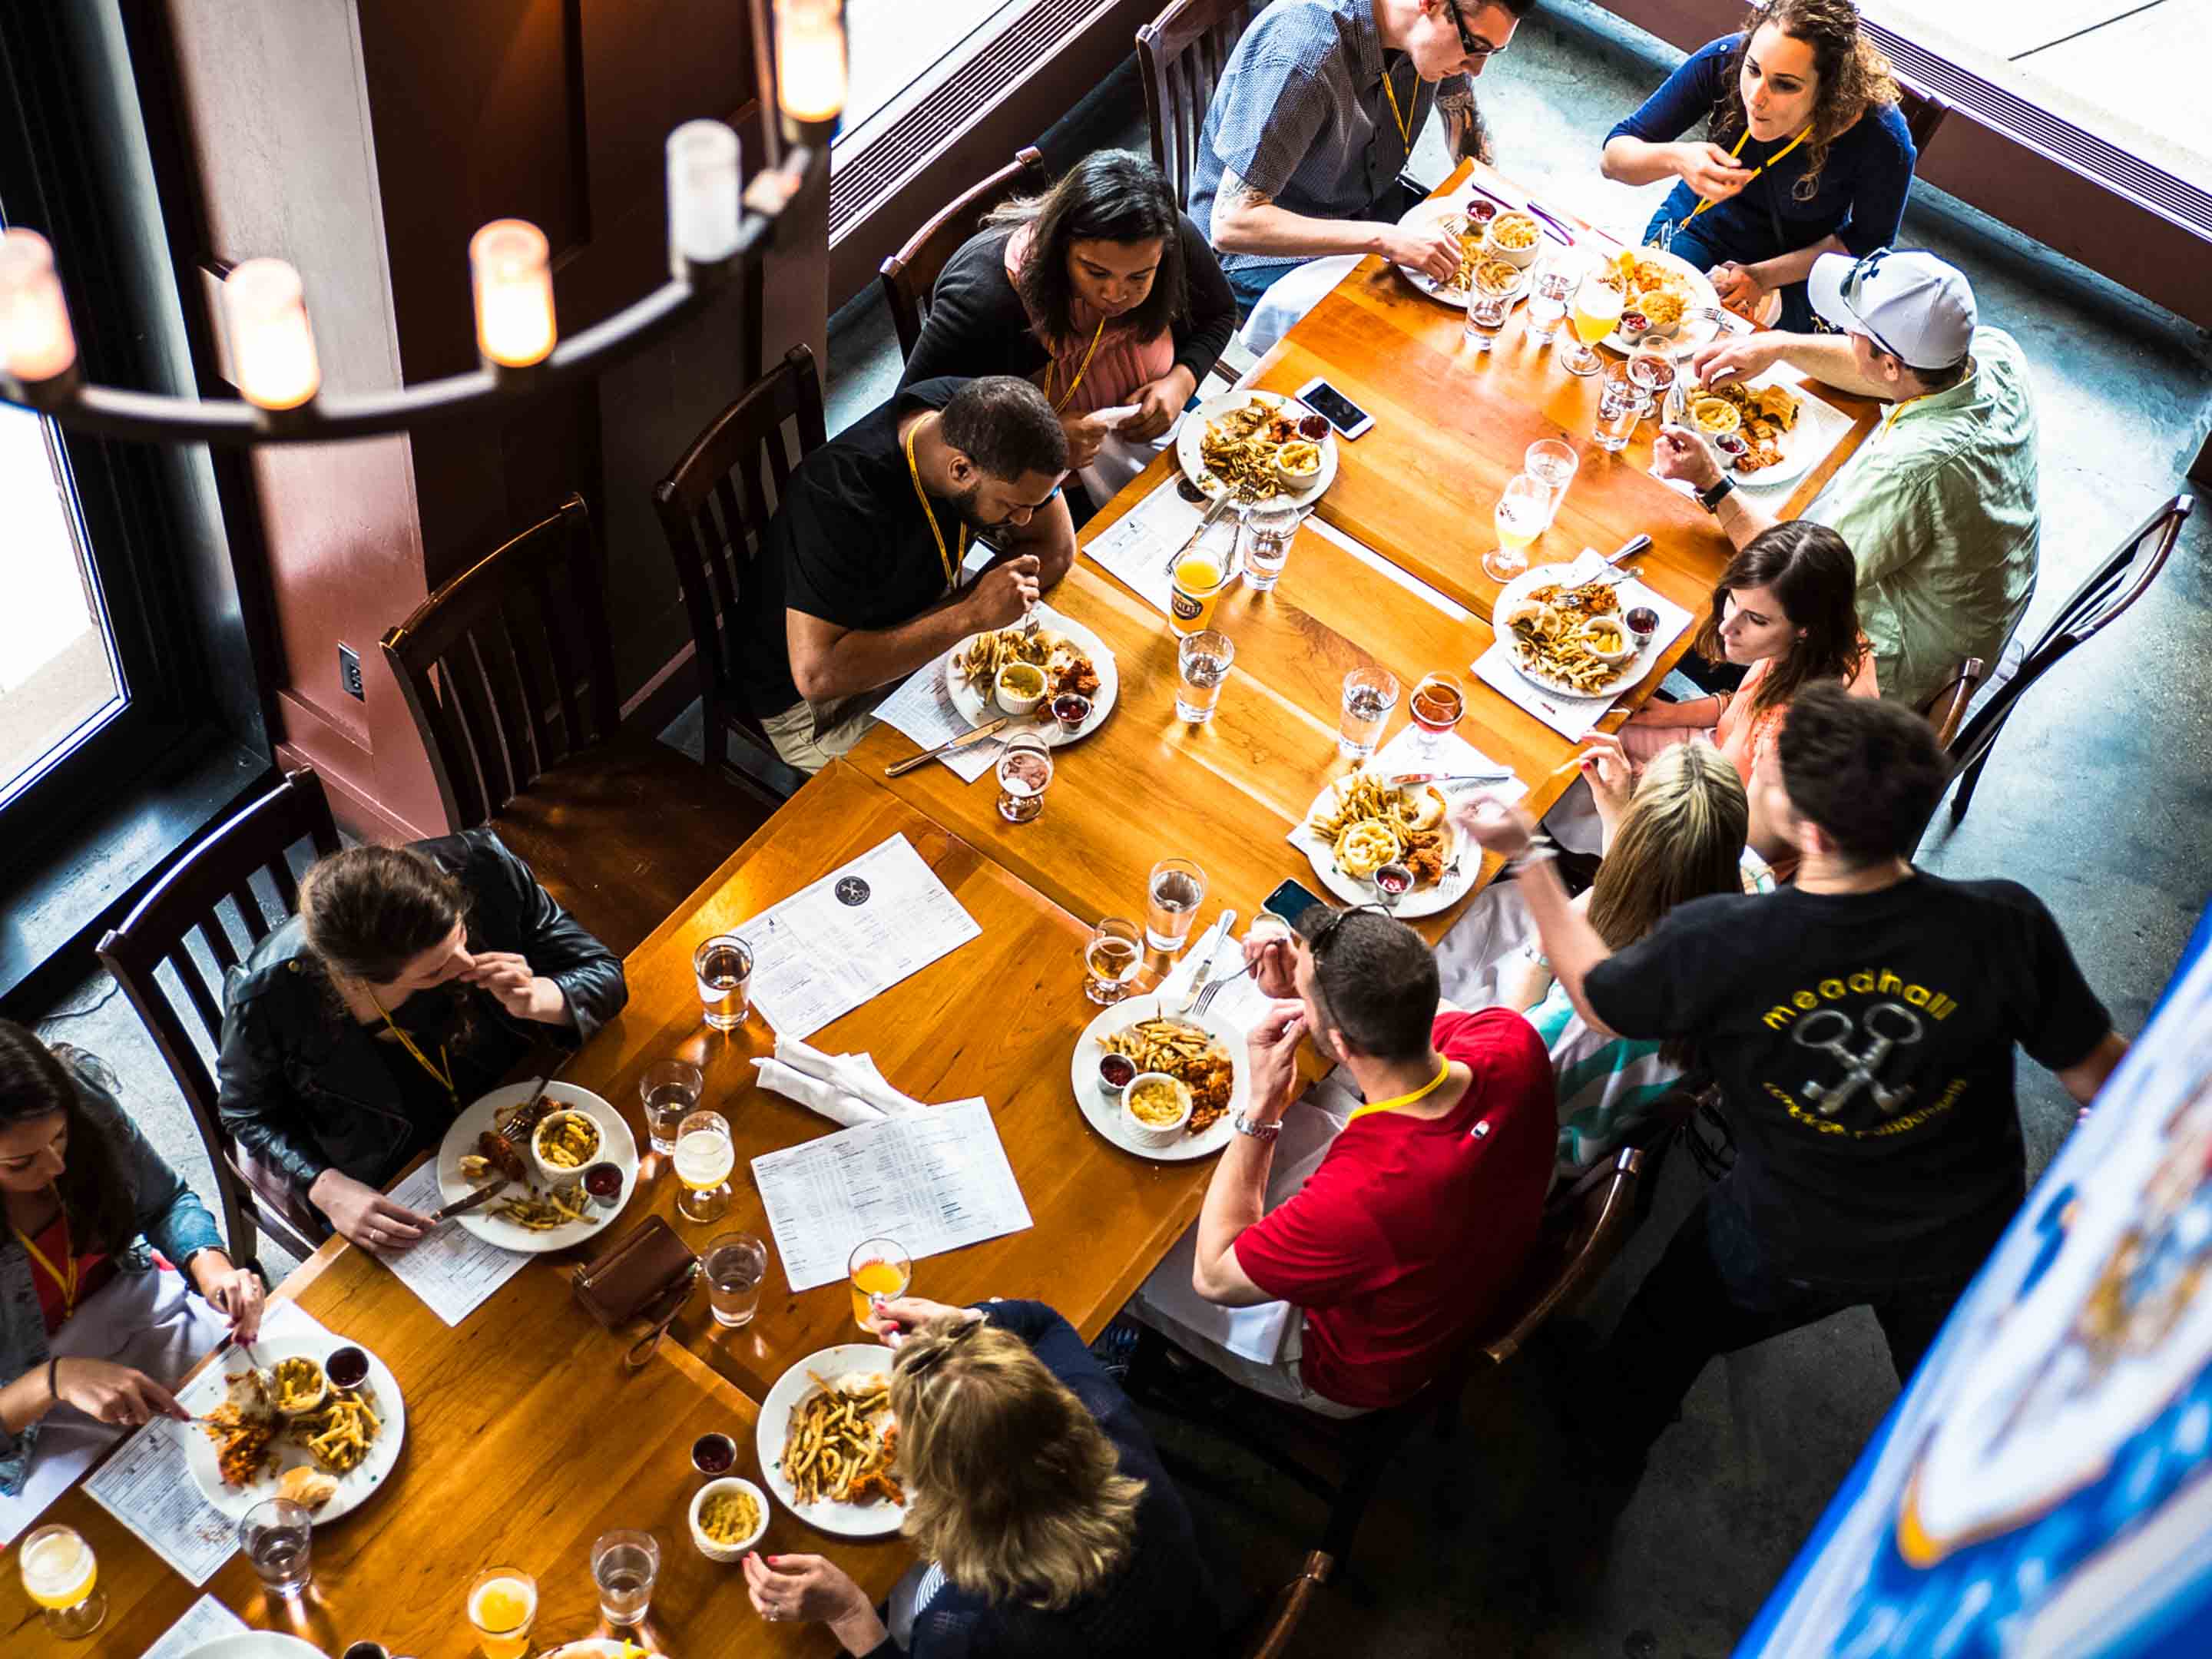 A private tour group with City Brew Tours enjoy a meal and beer pairing